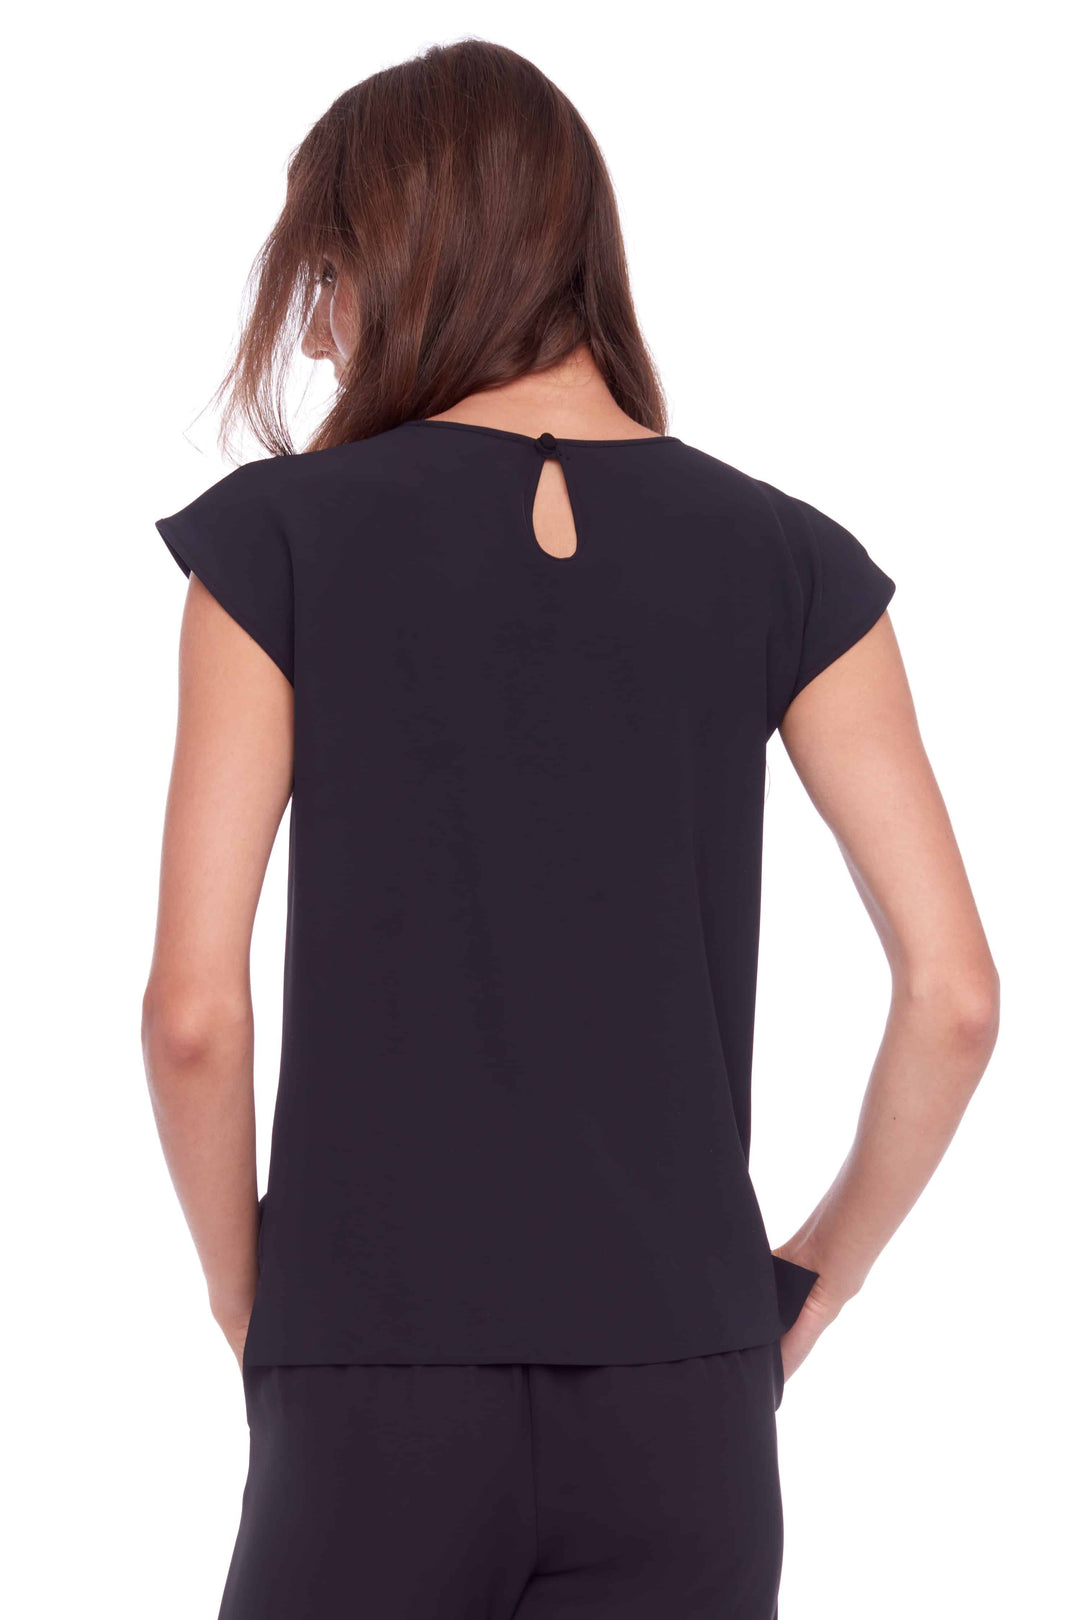 UP! Womens Top 30335